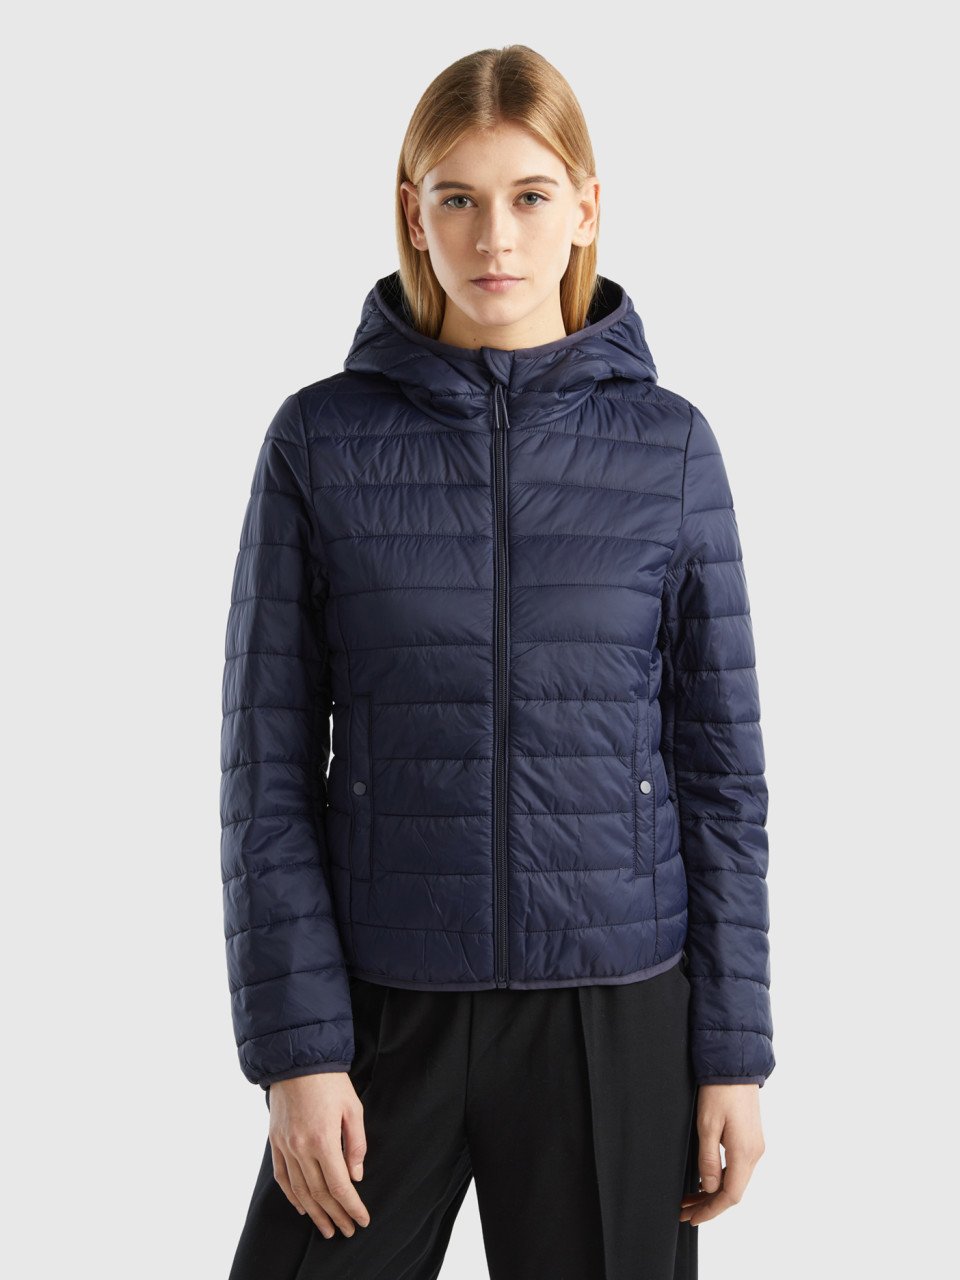 Benetton, Puffer Jacket With Recycled Wadding, Dark Blue, Women